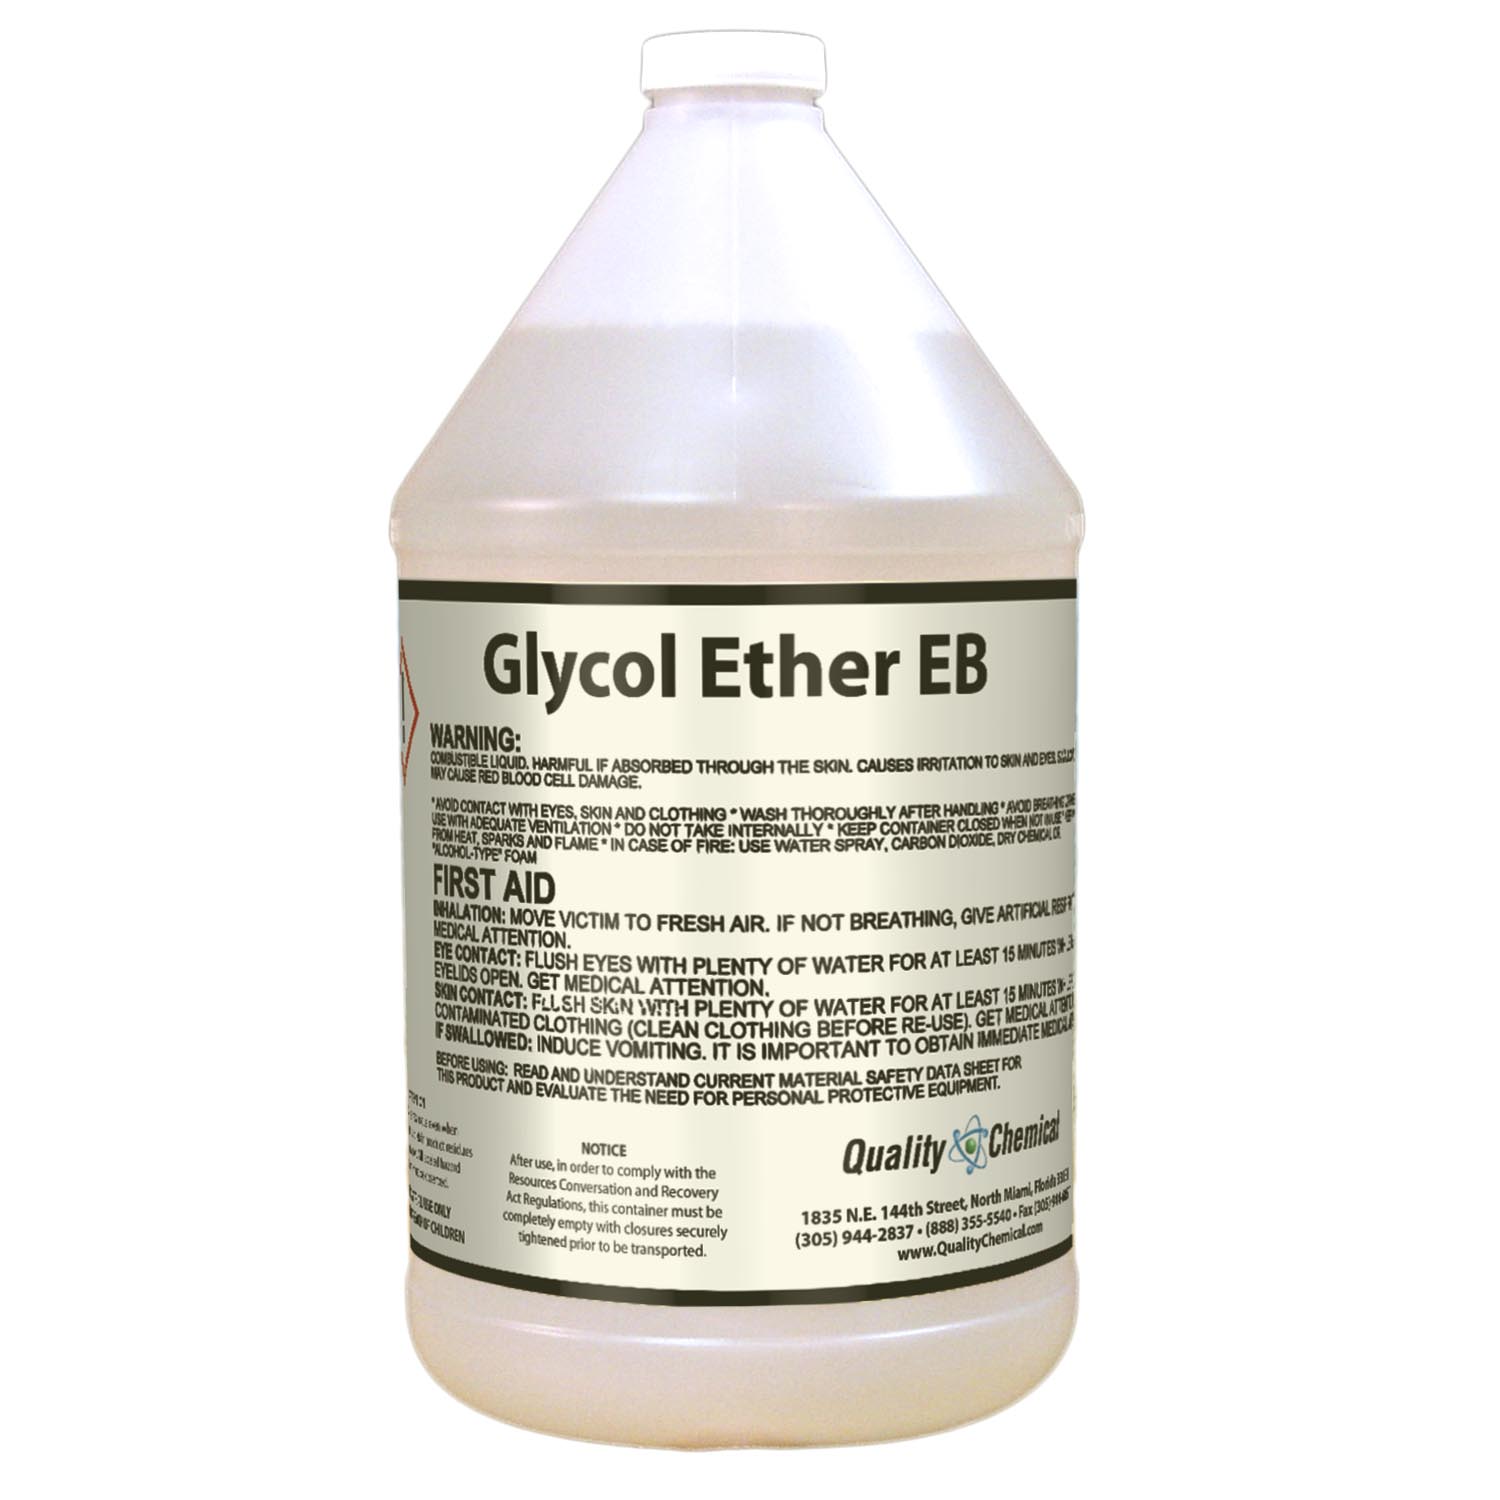 Quality Chemical Company Glycol Ether Eb Butyl Cellosolve